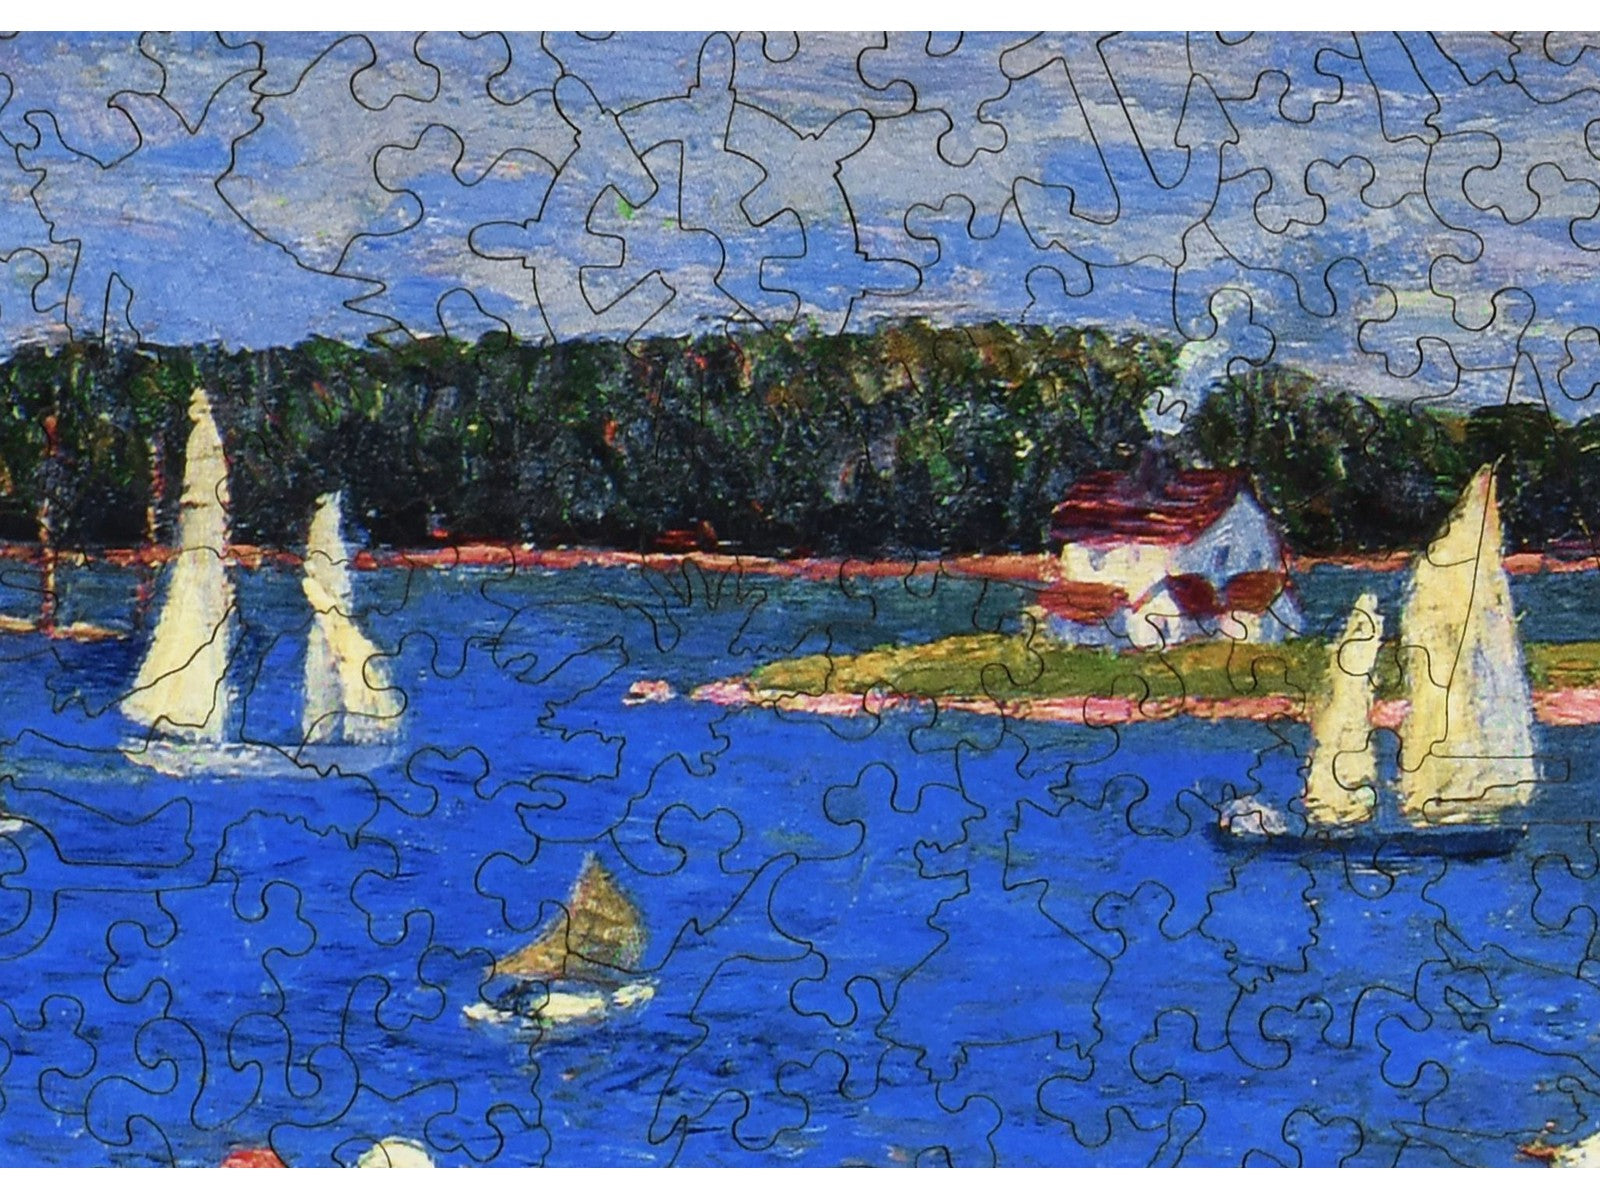 A closeup of the front of the puzzle, Mahone Bay.